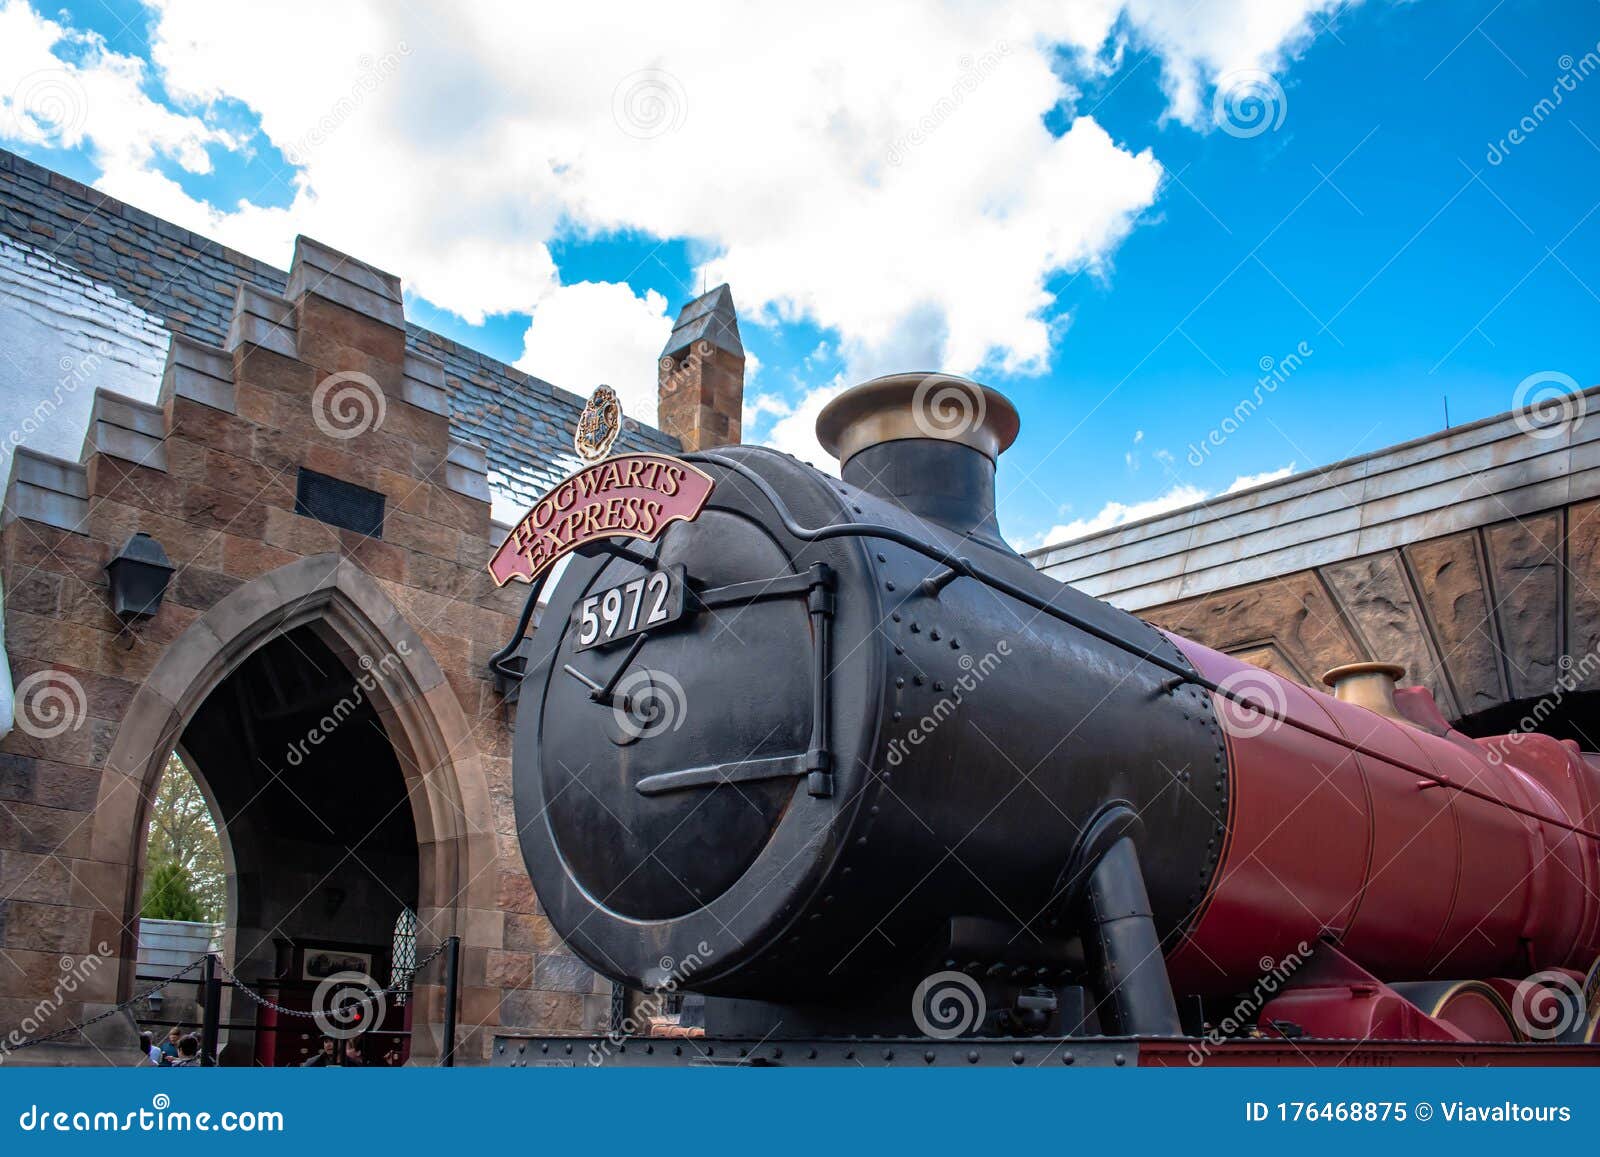 Download Partial View Of Hogwarts Express Locomotive At Universals ...